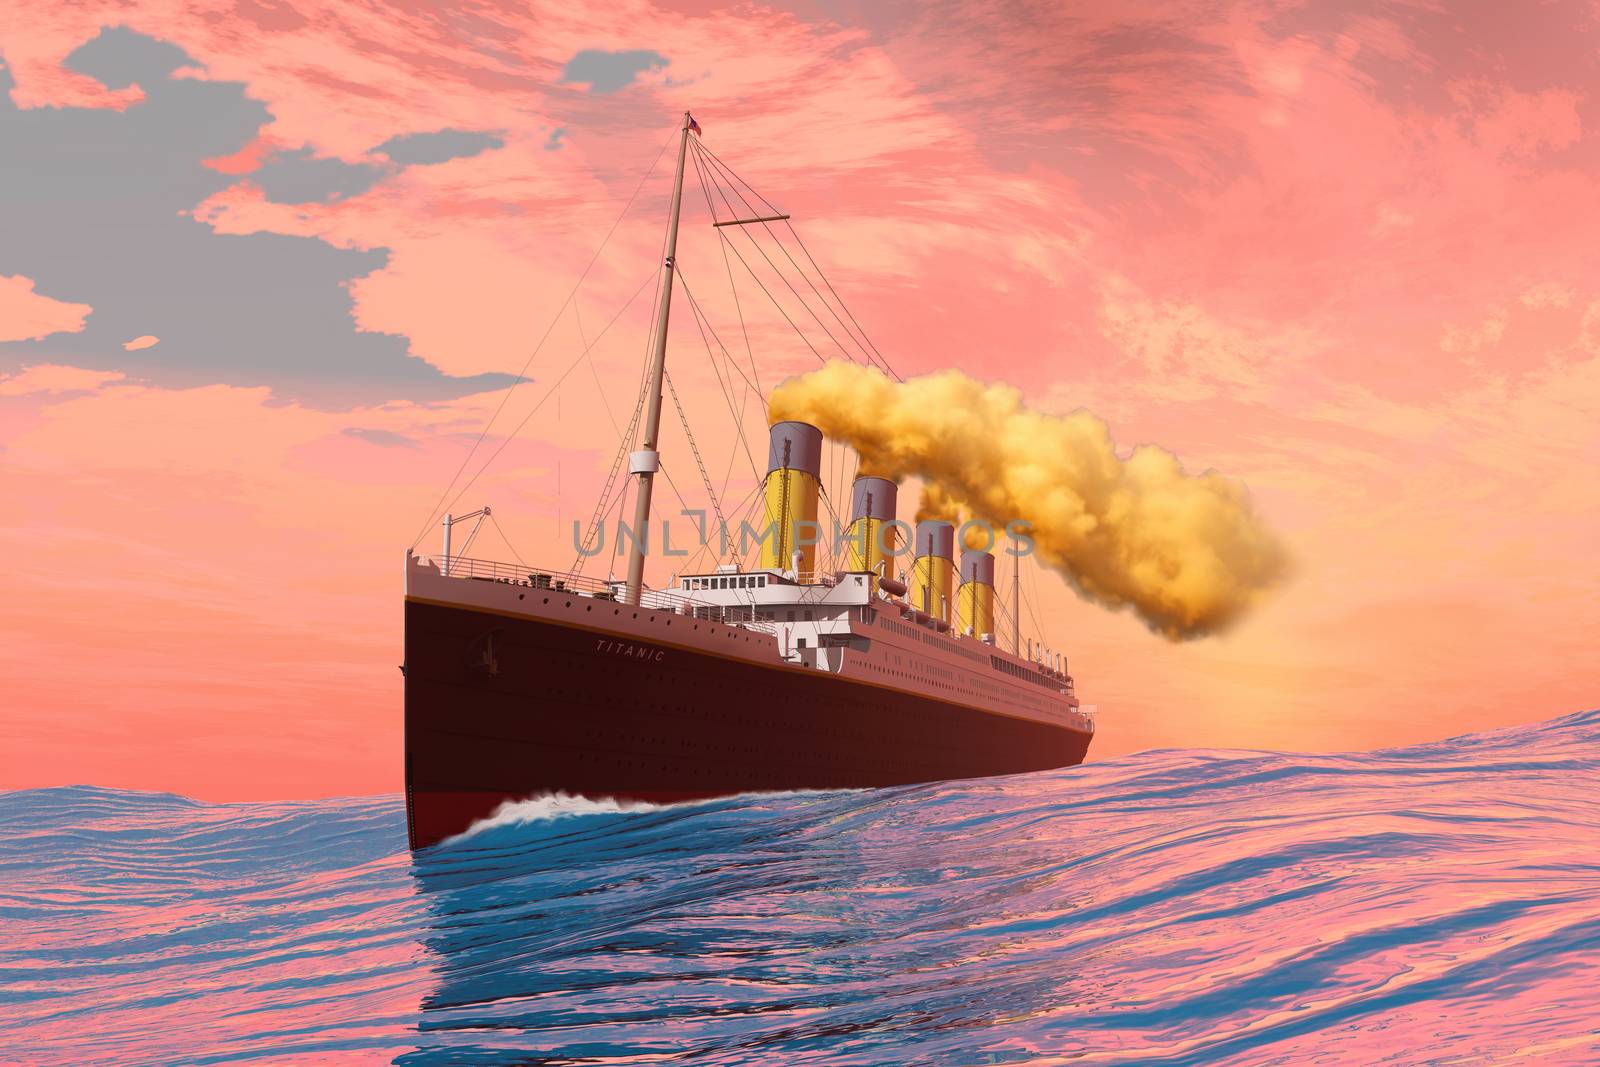 On the afternoon of the fateful day it sank the RMS Titanic cruises to its destiny with an iceberg.